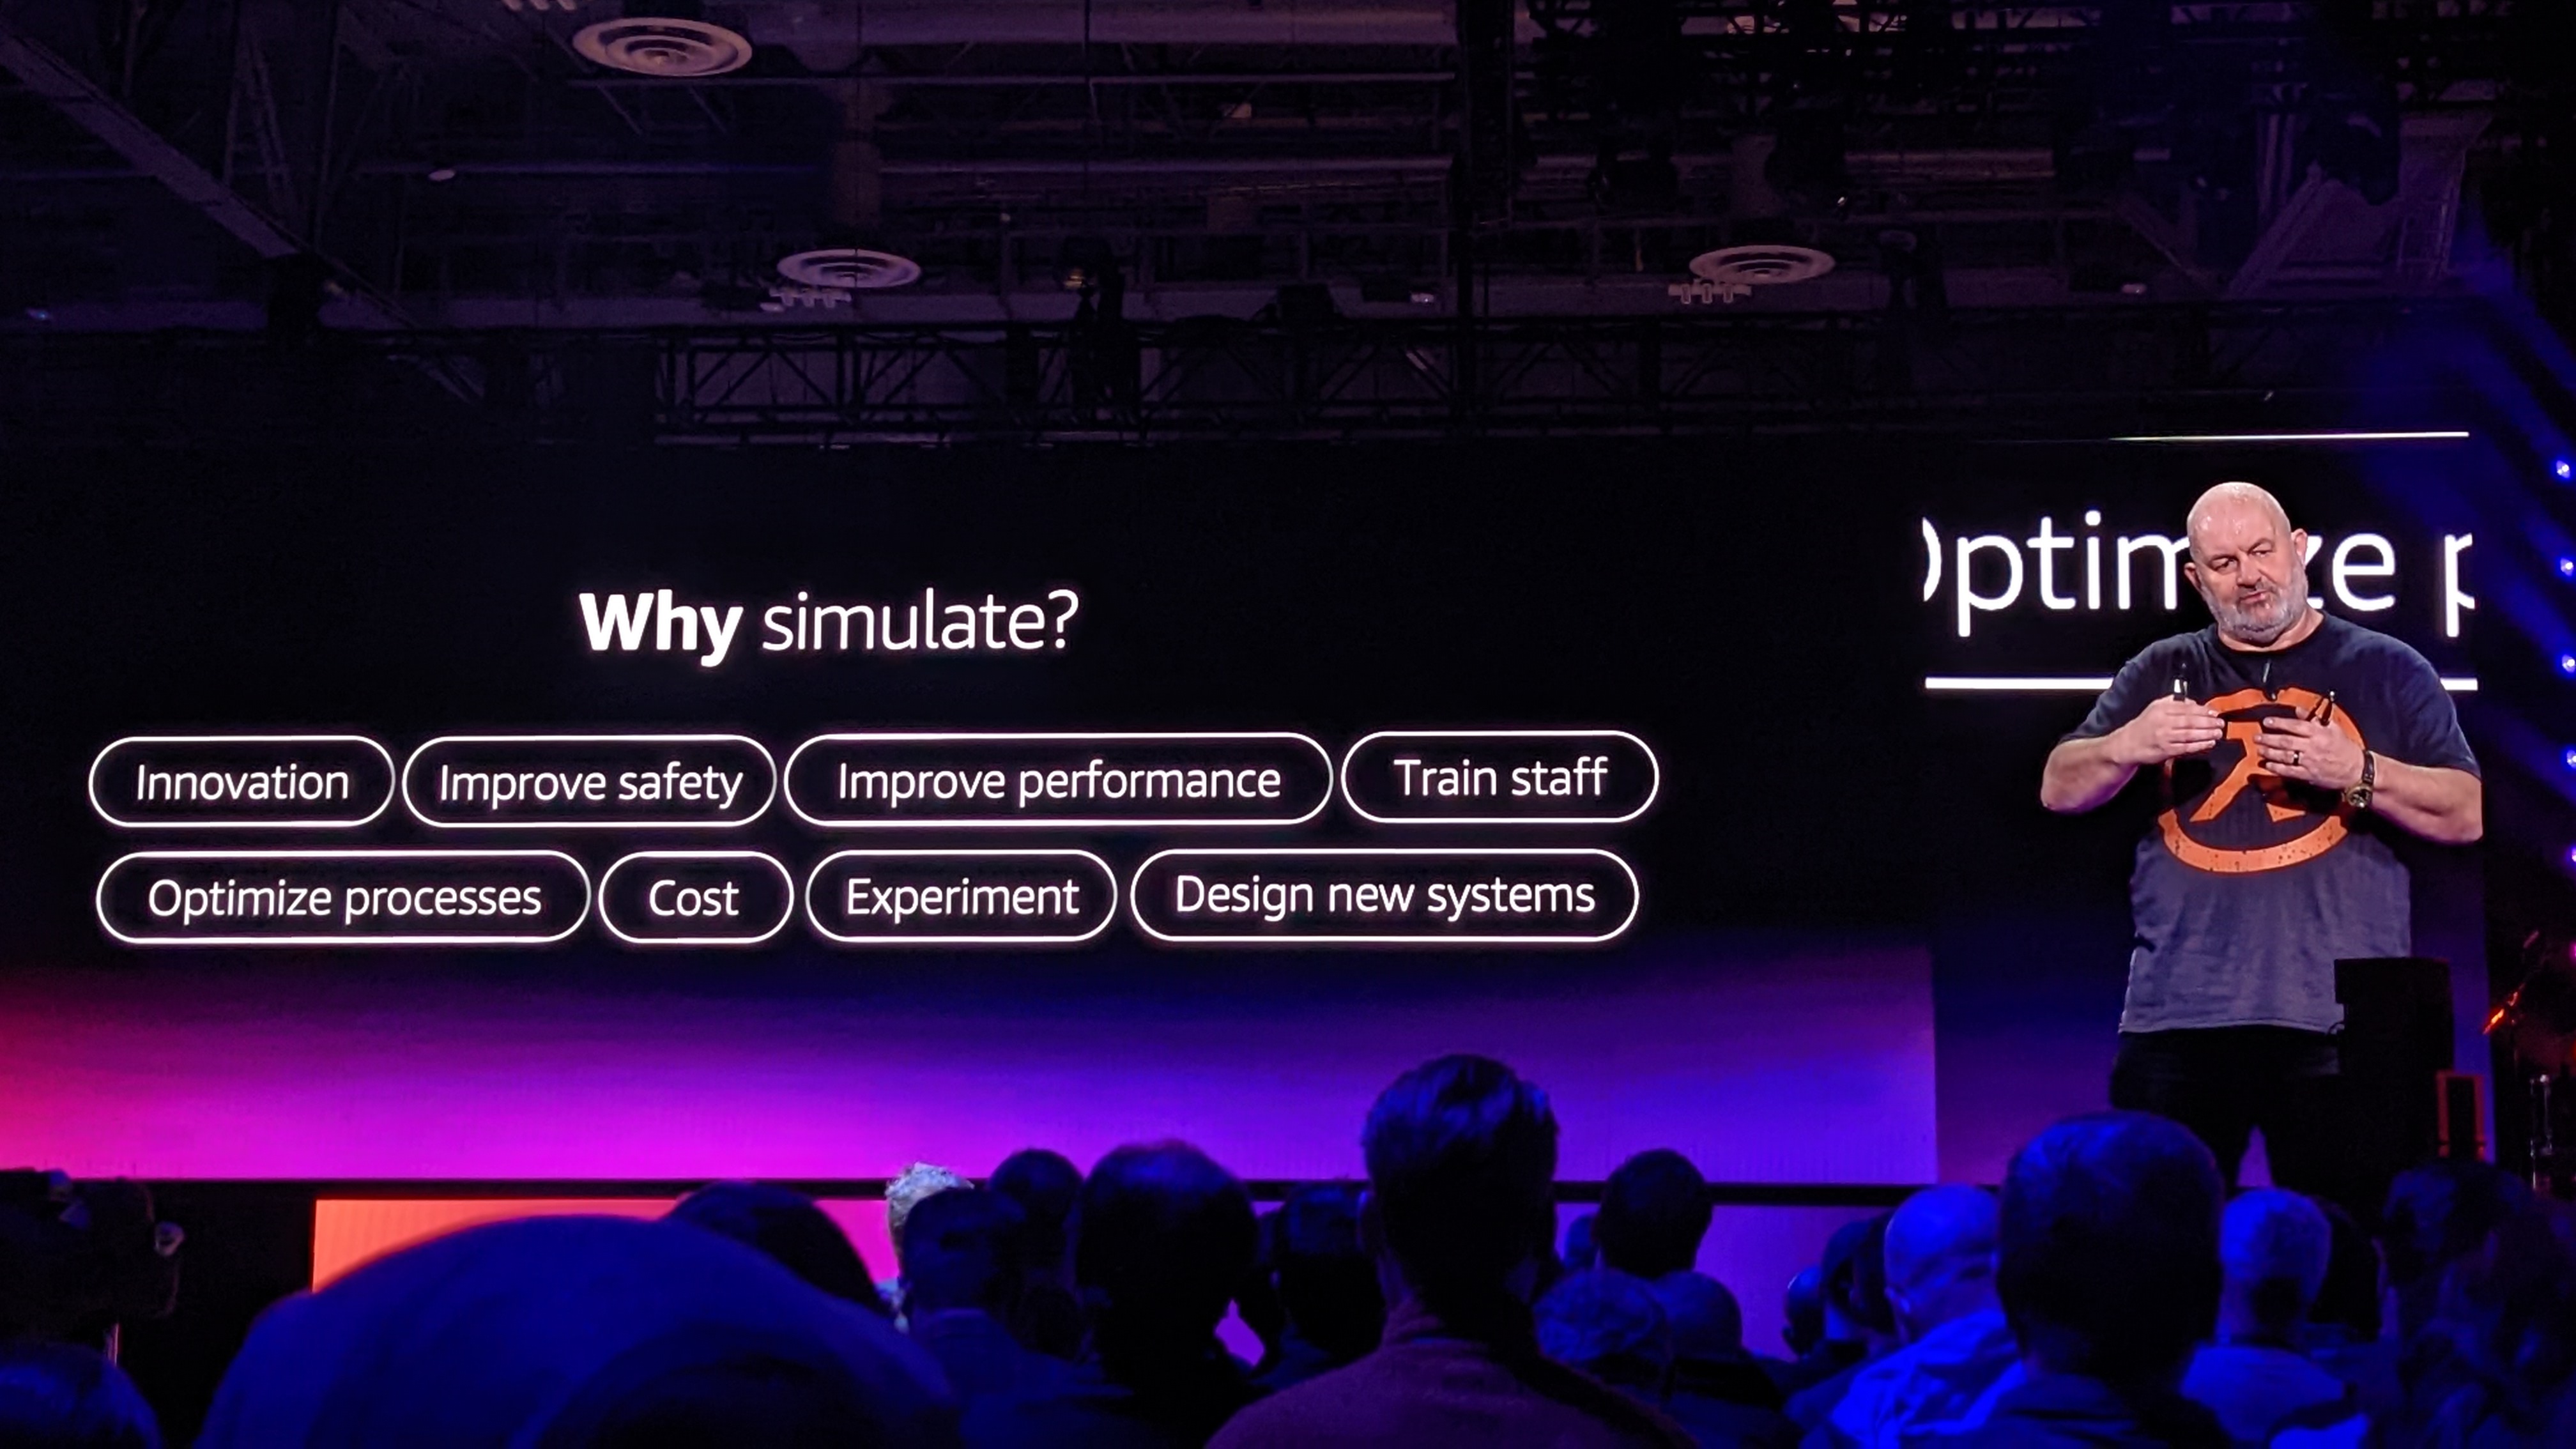 AWS re:Invent 2022